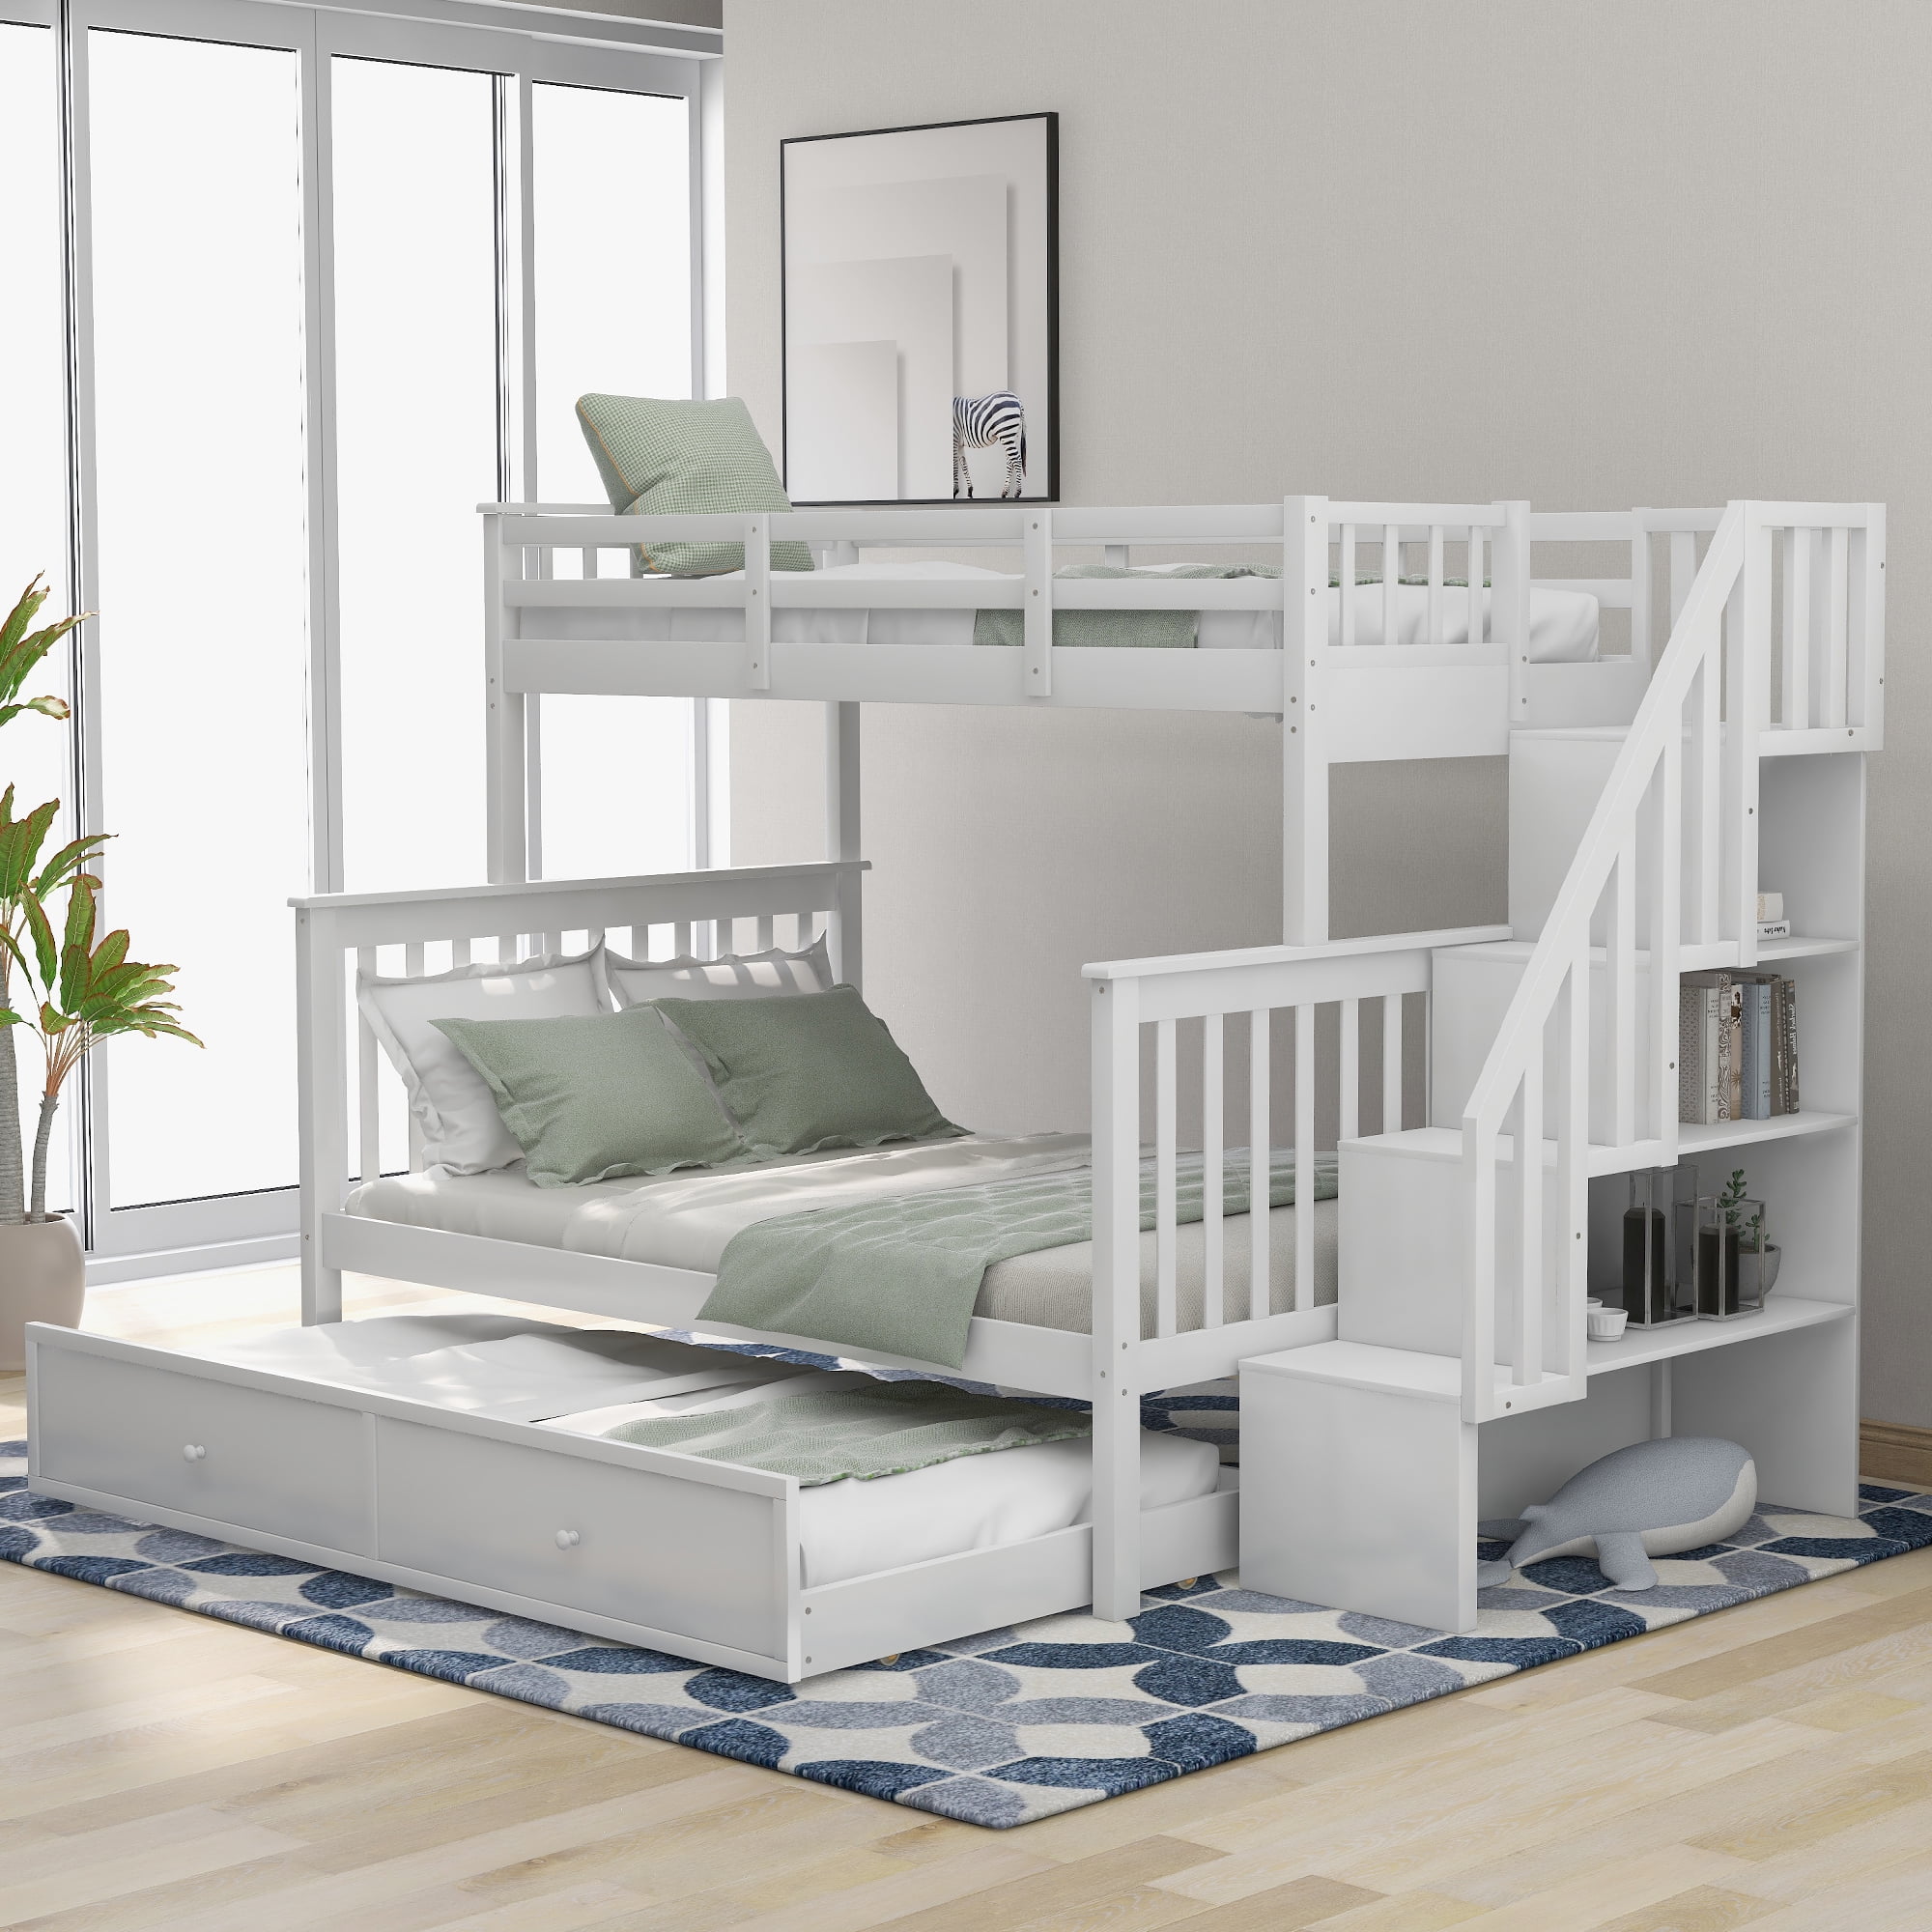 Stairway Twin Over Full Bunk Bed With, White Bunk Beds With Stairs And Storage